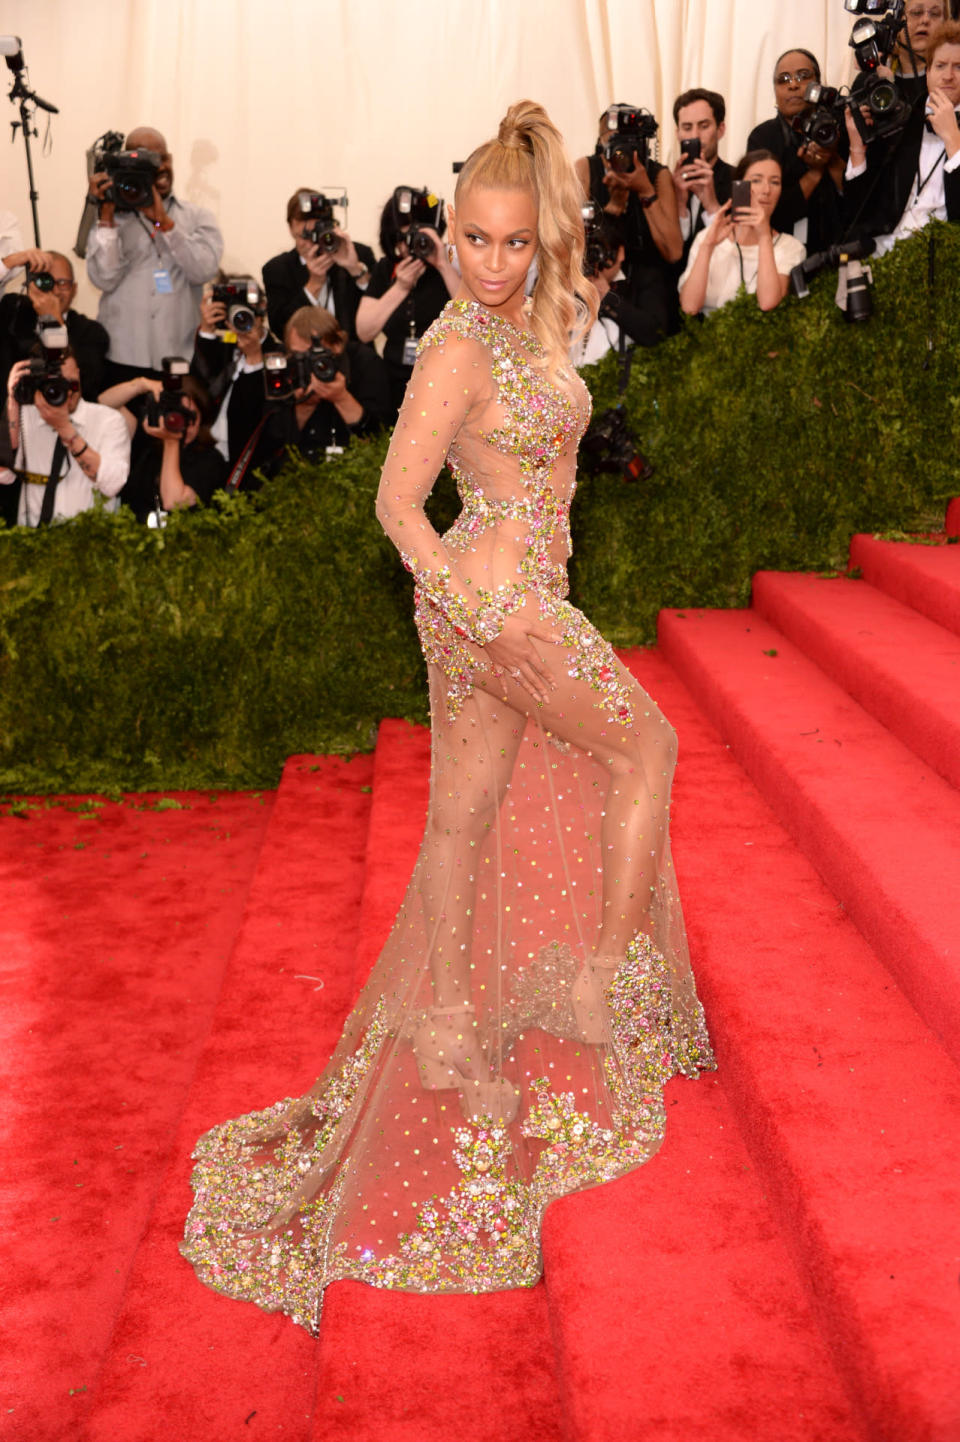 Beyonce in a Givenchy dress at the 2015 Met Gala.